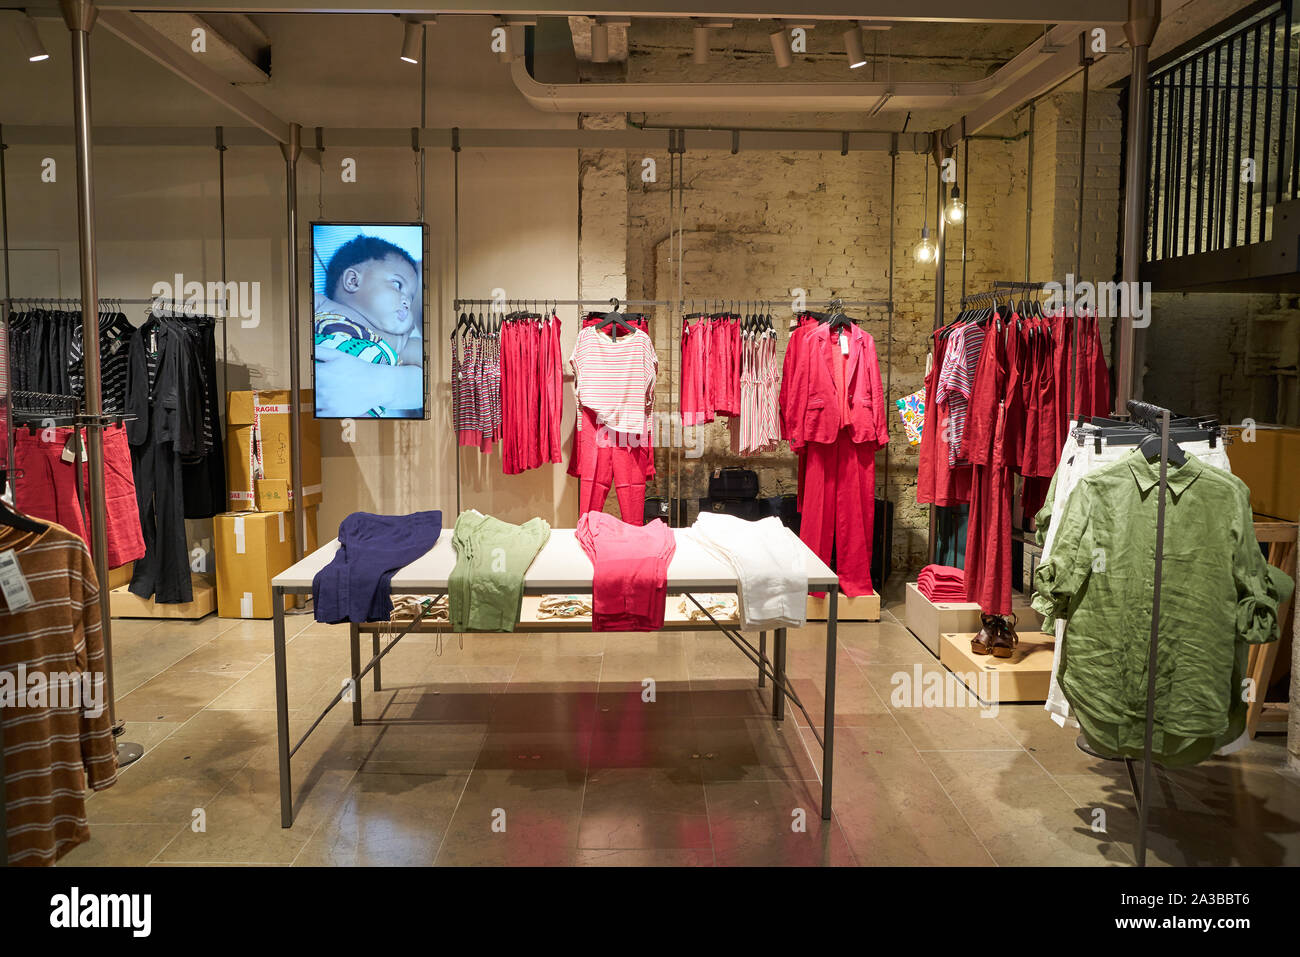 United color benetton shop in hi-res stock photography and images - Alamy